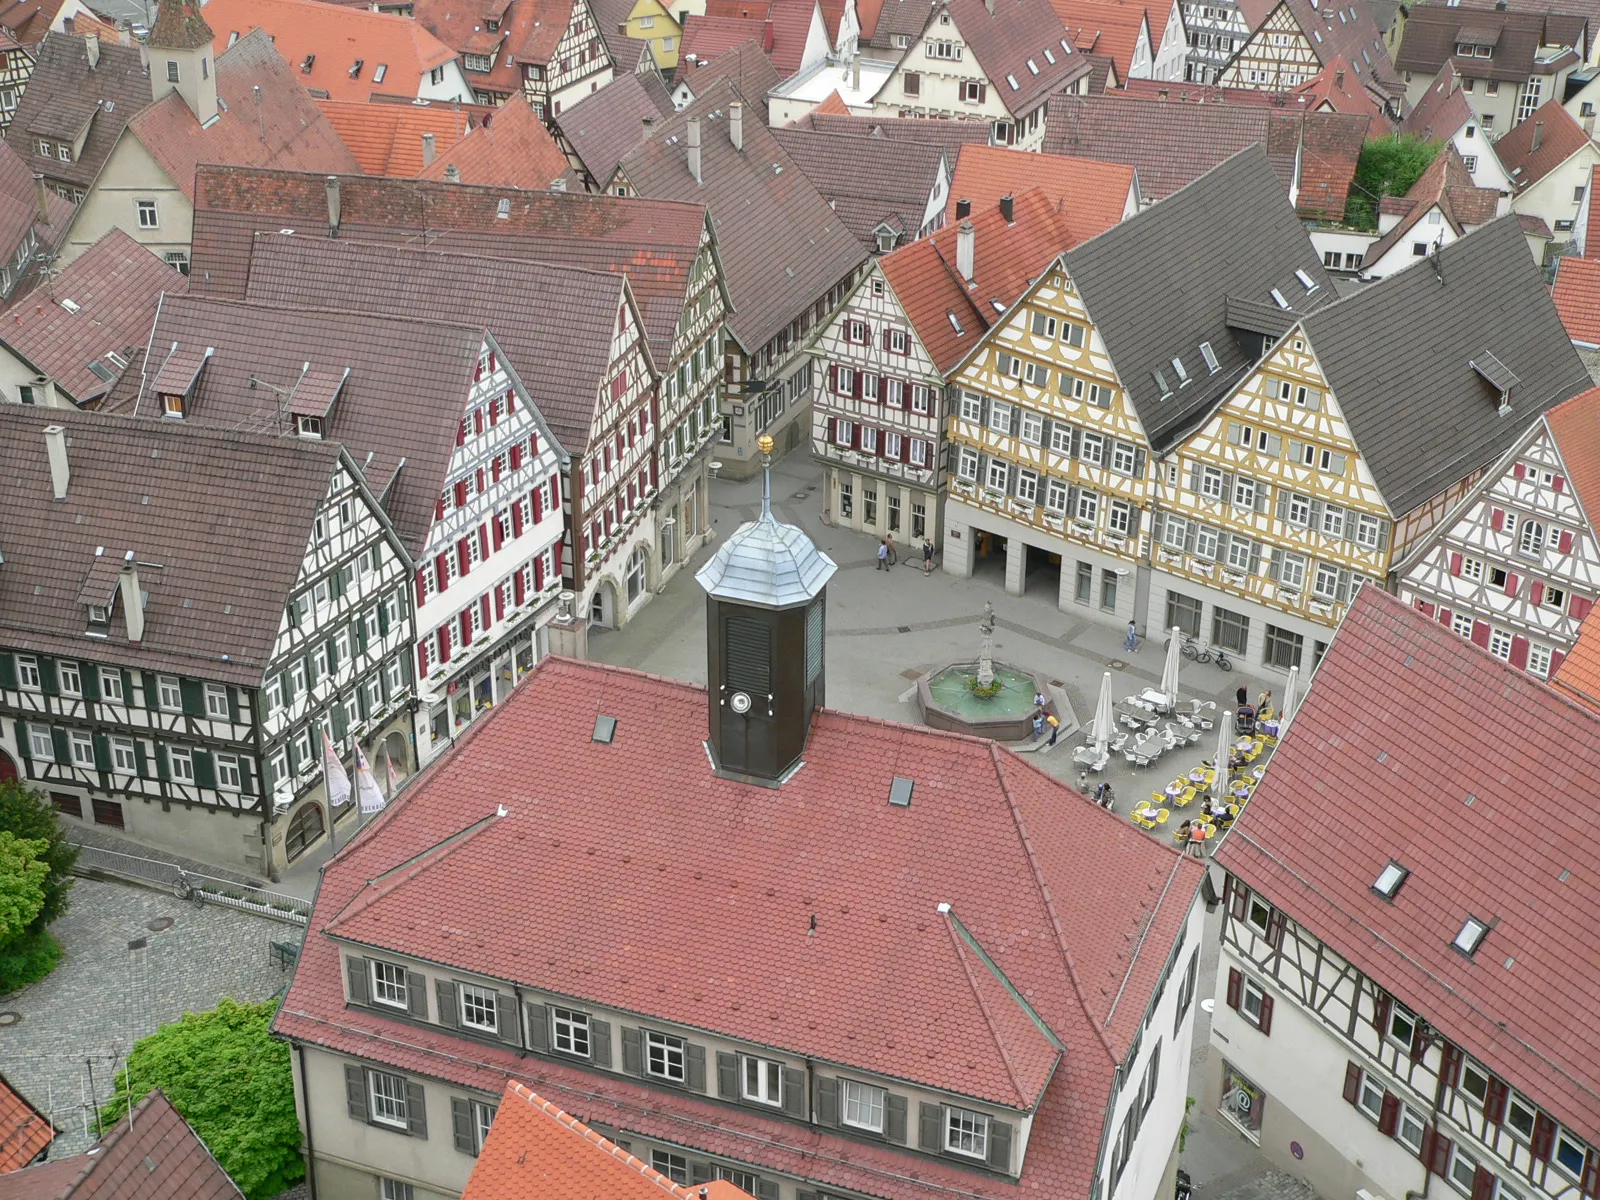 Photo showing: Market Square in Herrenberg, Germany, seen from the tower of the church Stiftskirche